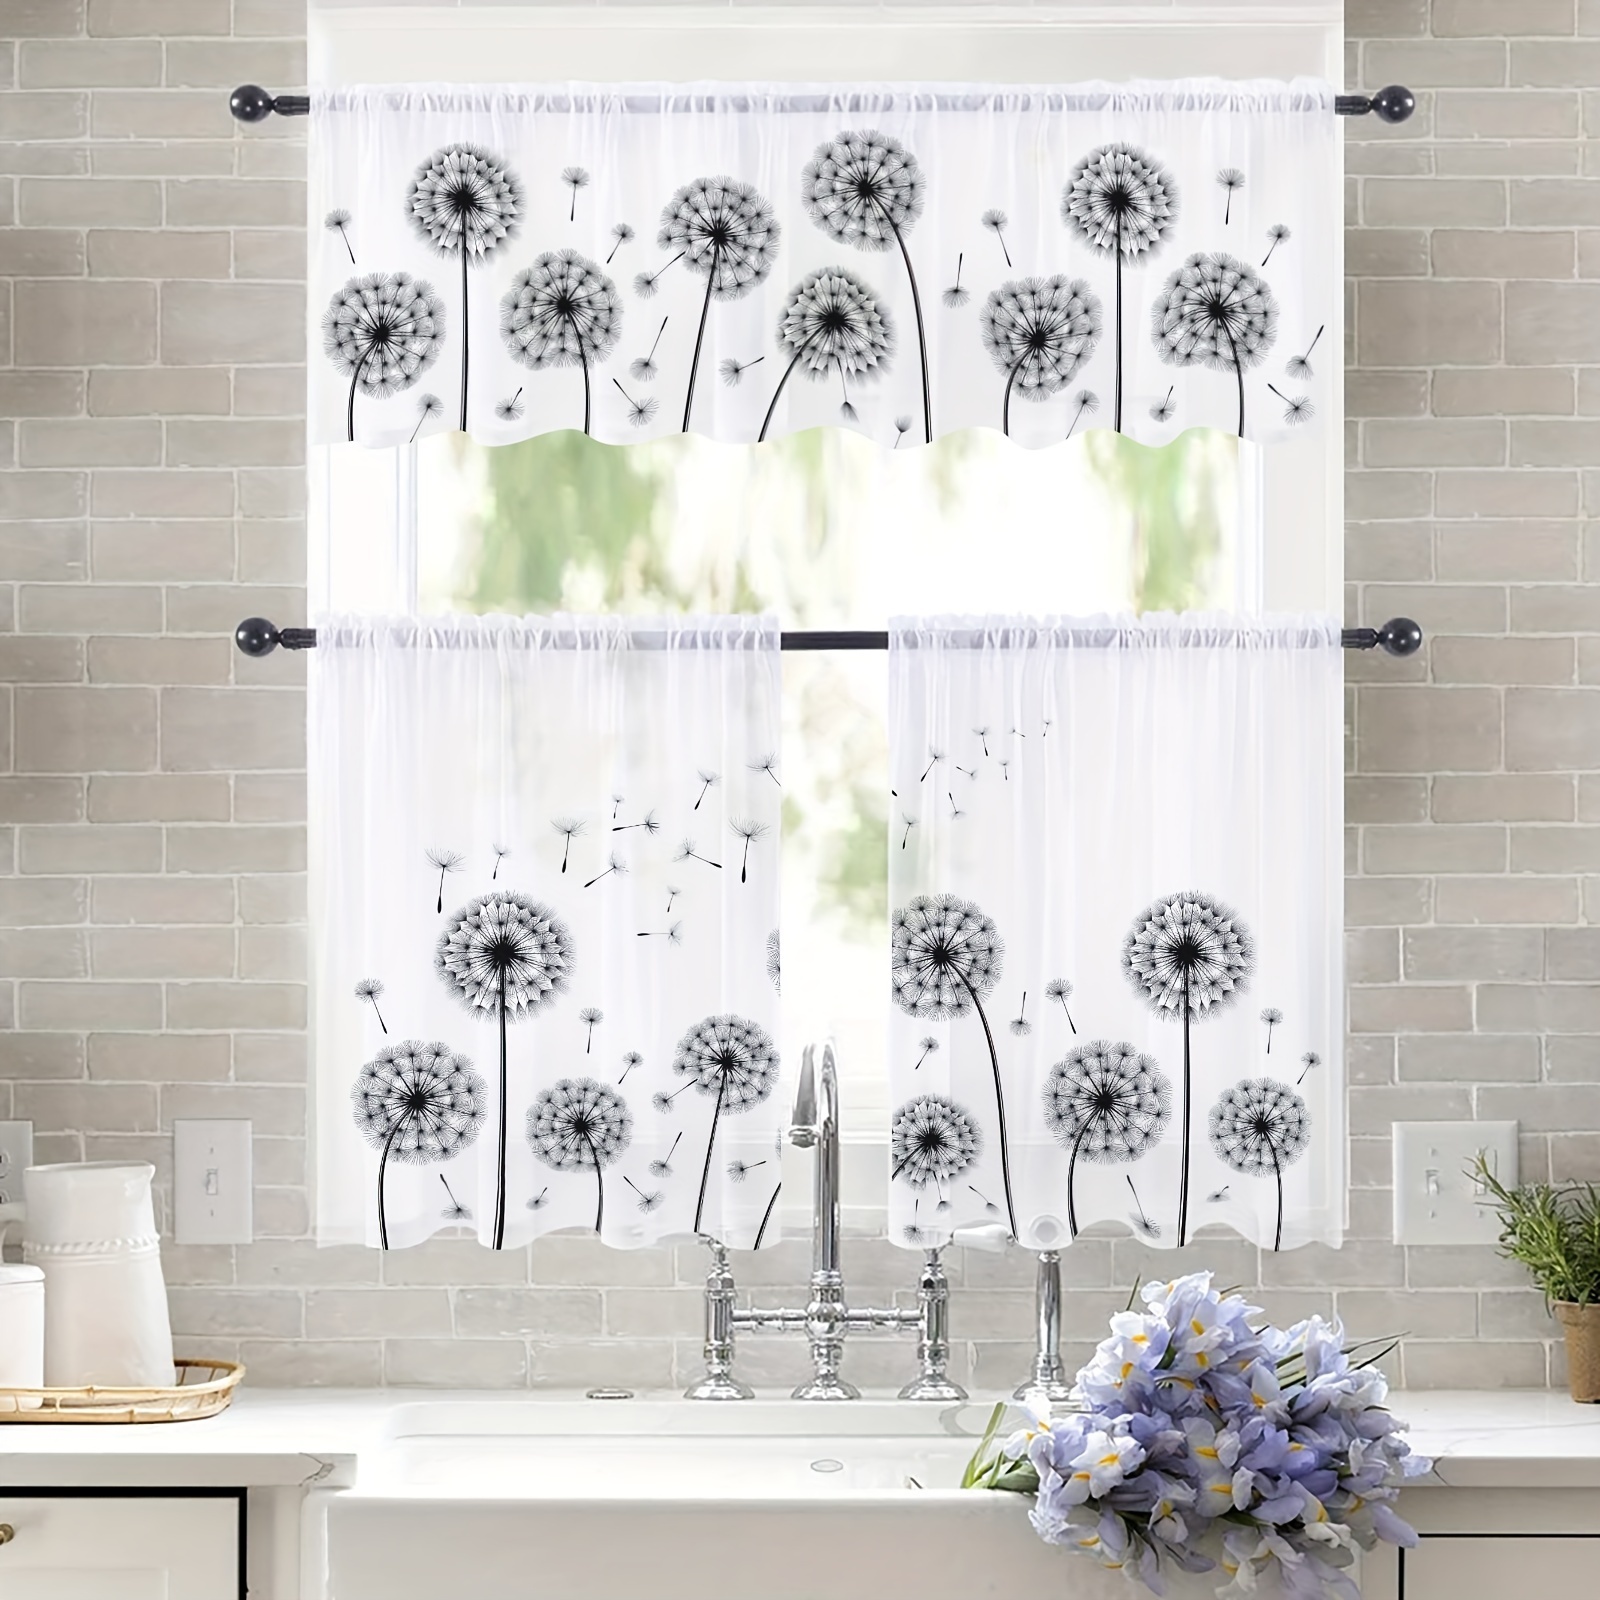 

Art Deco Semi-sheer Twill Weave Rod Pocket Dandelion Pattern Curtain Tiers - 100% Polyester Black And White Floral Design For Bedroom, Office, Kitchen, Living Room, Study - Cordless, Pastoral Theme